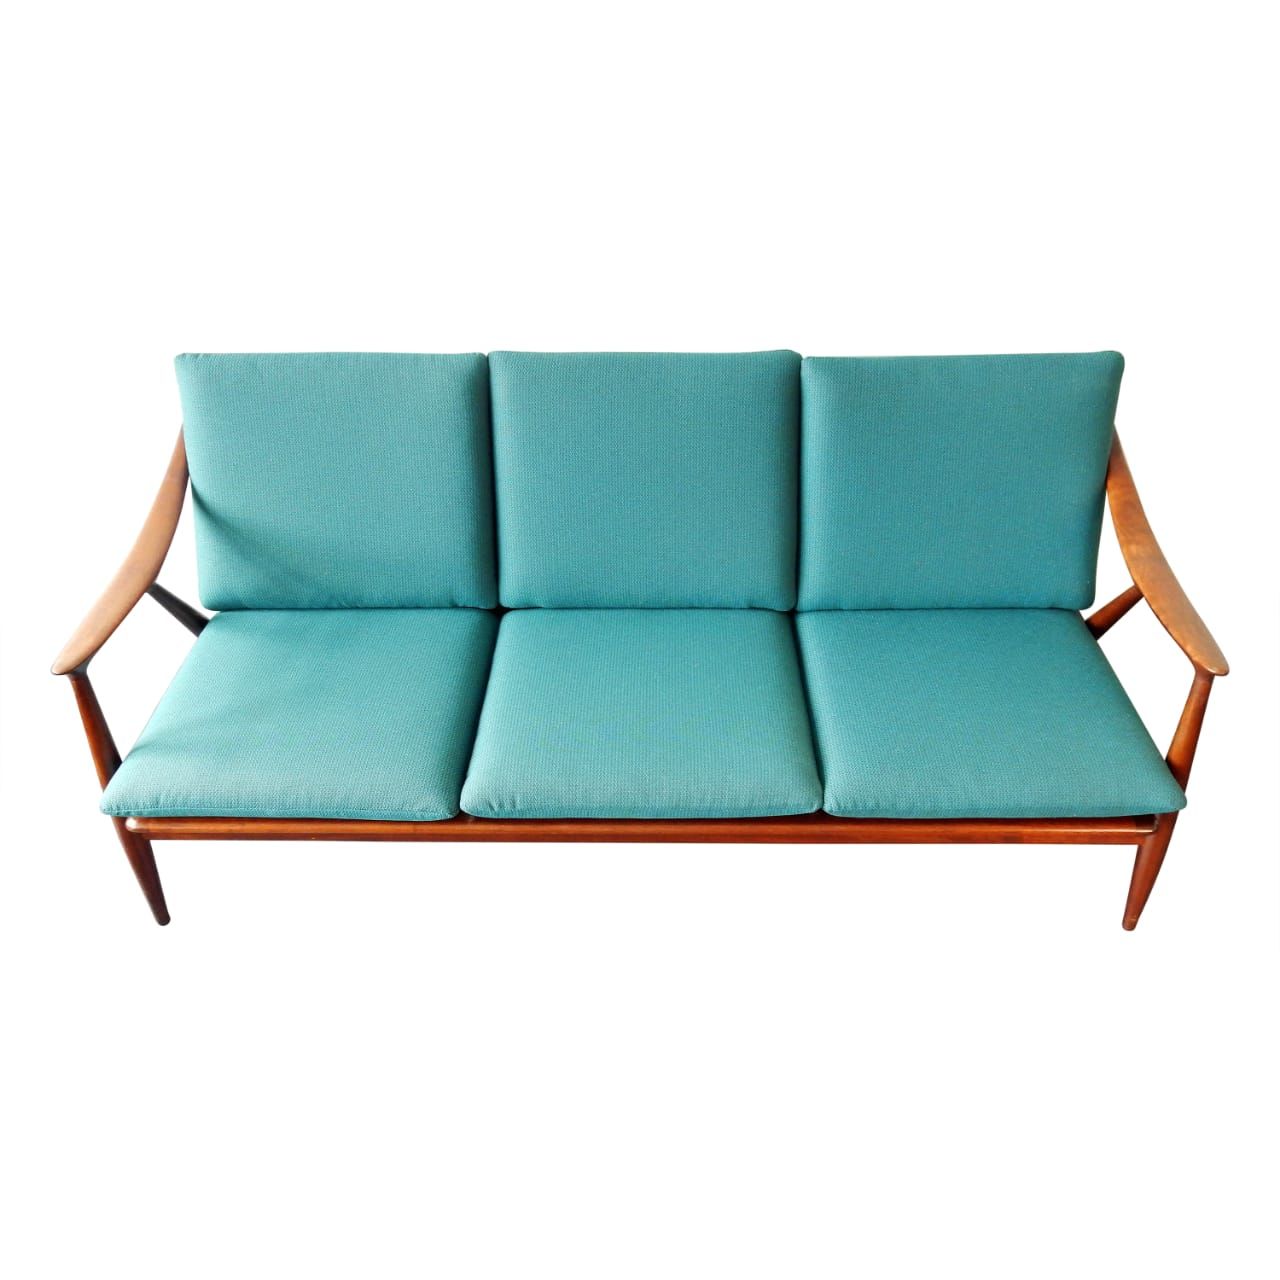 Mid Century 3 Seat Sofade Ster Gelderland, Holland For Sale At 1stdibs Within Mid Century 3 Seat Couches (Gallery 9 of 20)